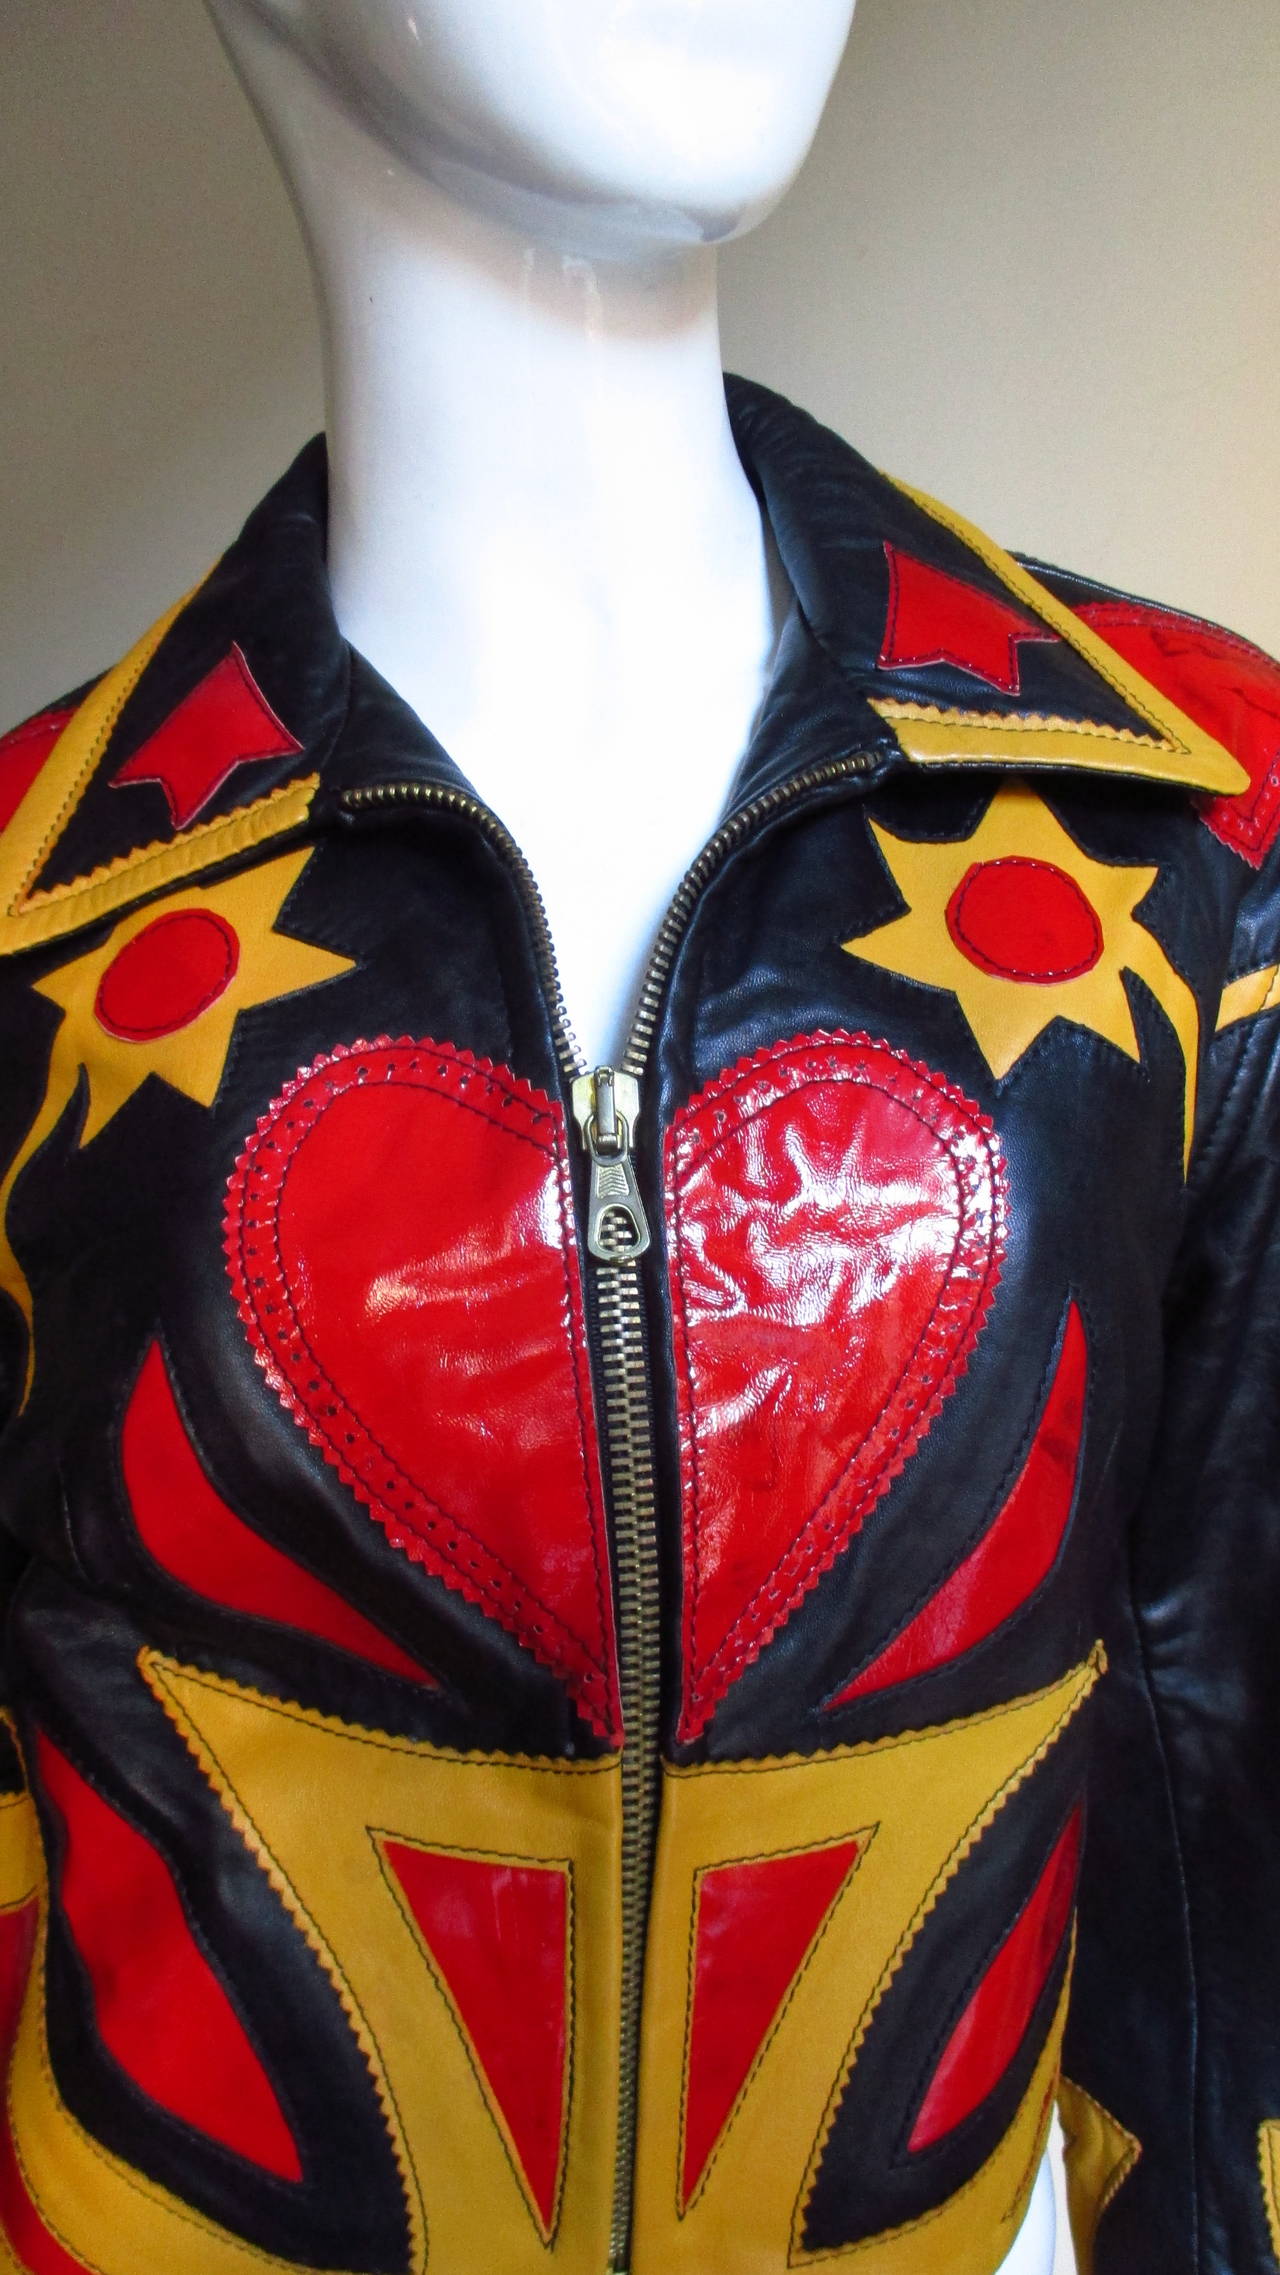 A stunning super soft, supple leather jacket from Moschino in a great combination of gold leather and red patent leather on a black leather background.  Intricate cutouts with insets and appliques of flowers, leaves, stars, circles and abstract